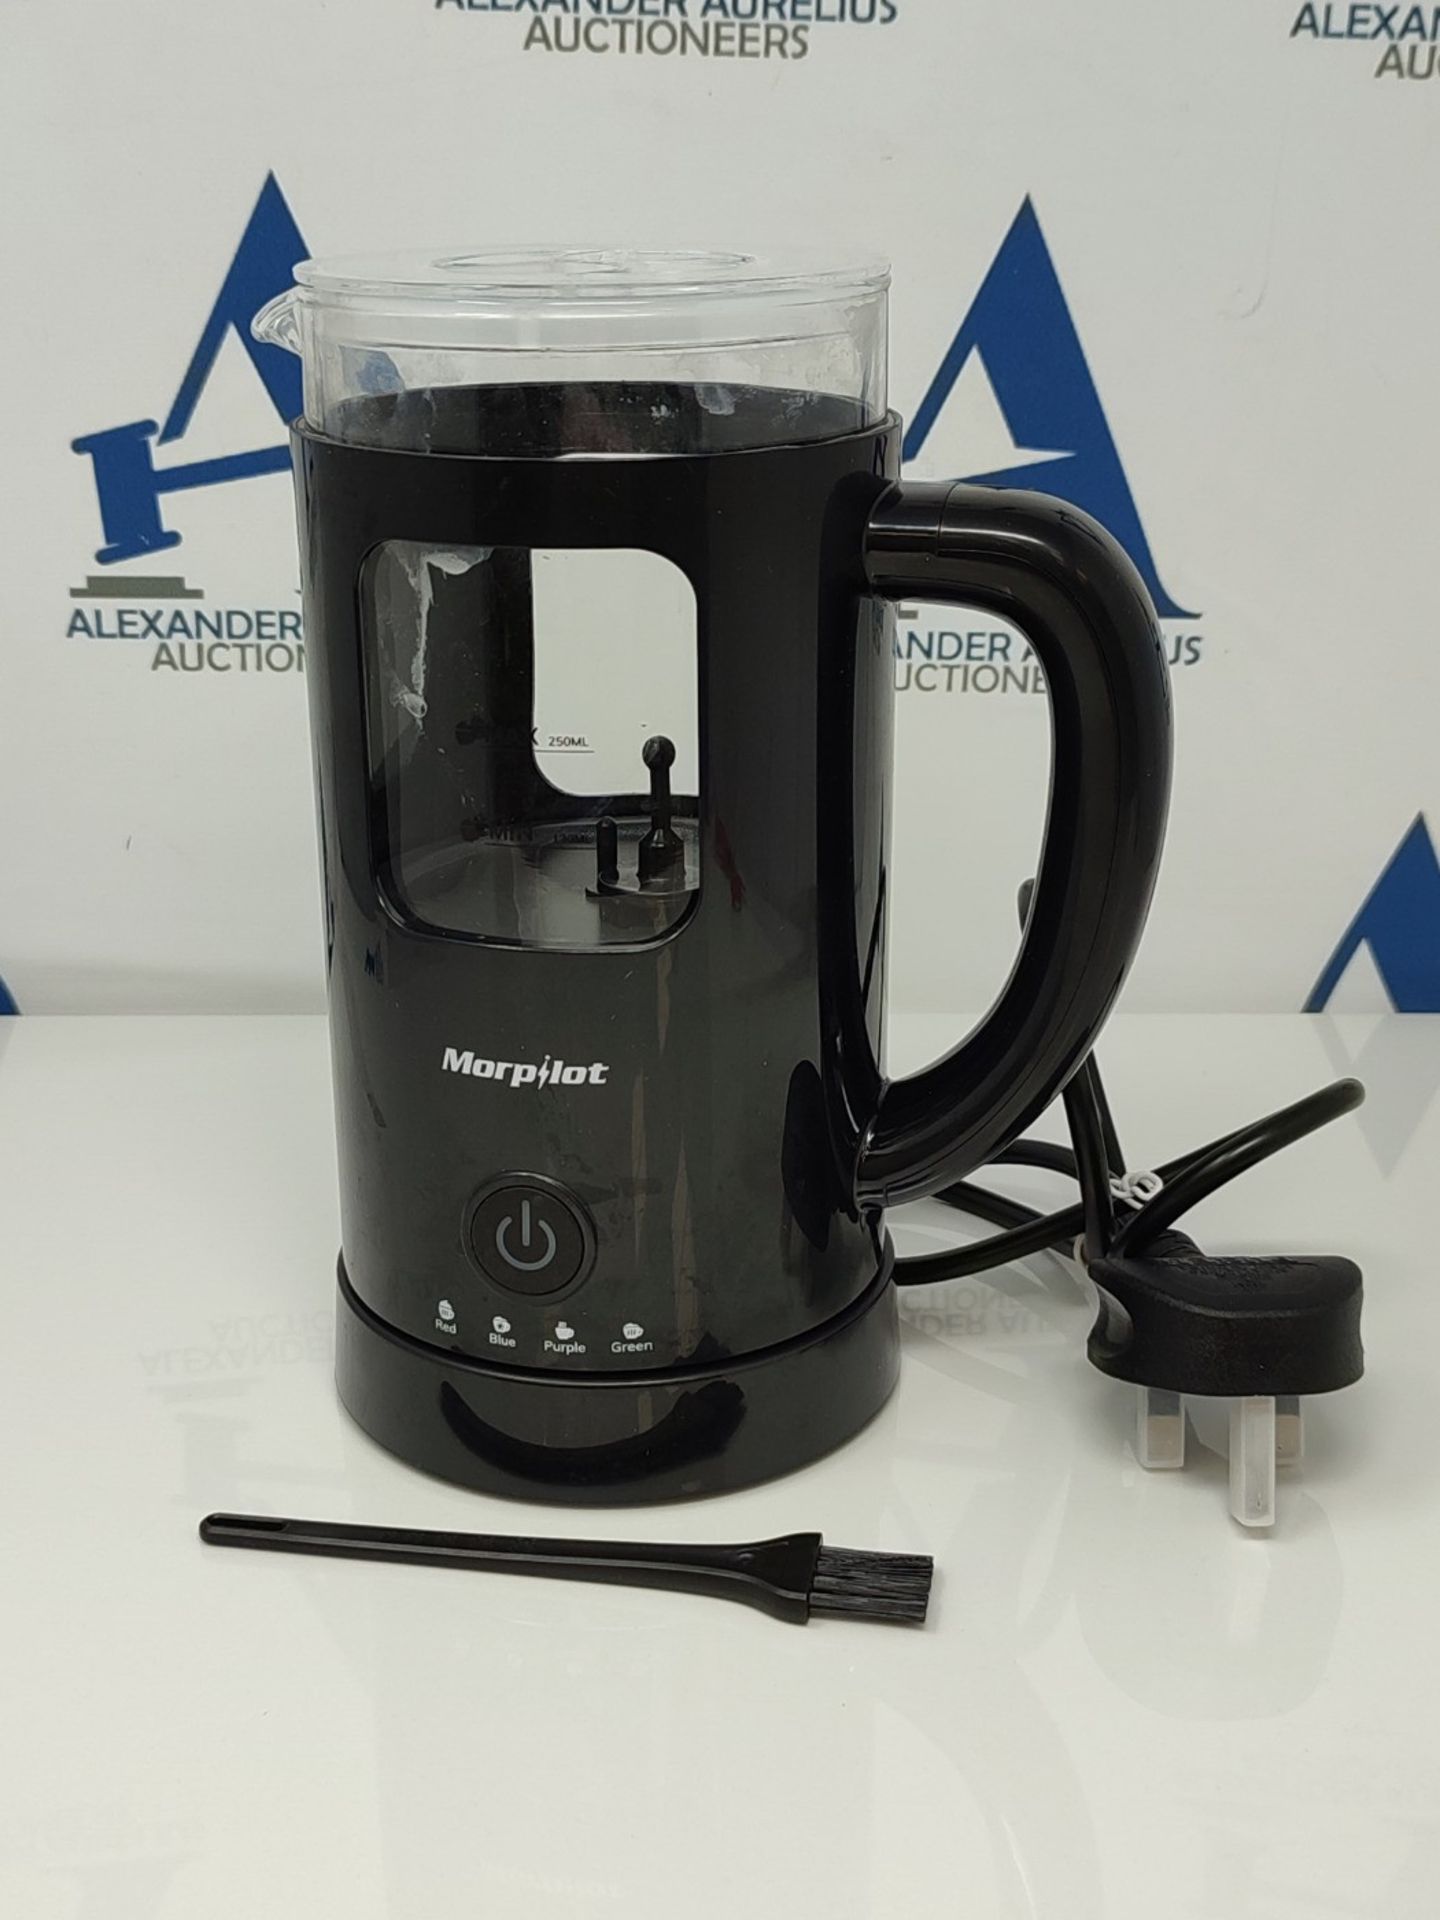 Milk Frother, Morpilot 4 in 1 Automatic Coffee Frother, Glass Material, 600ml Large Ca - Bild 2 aus 2